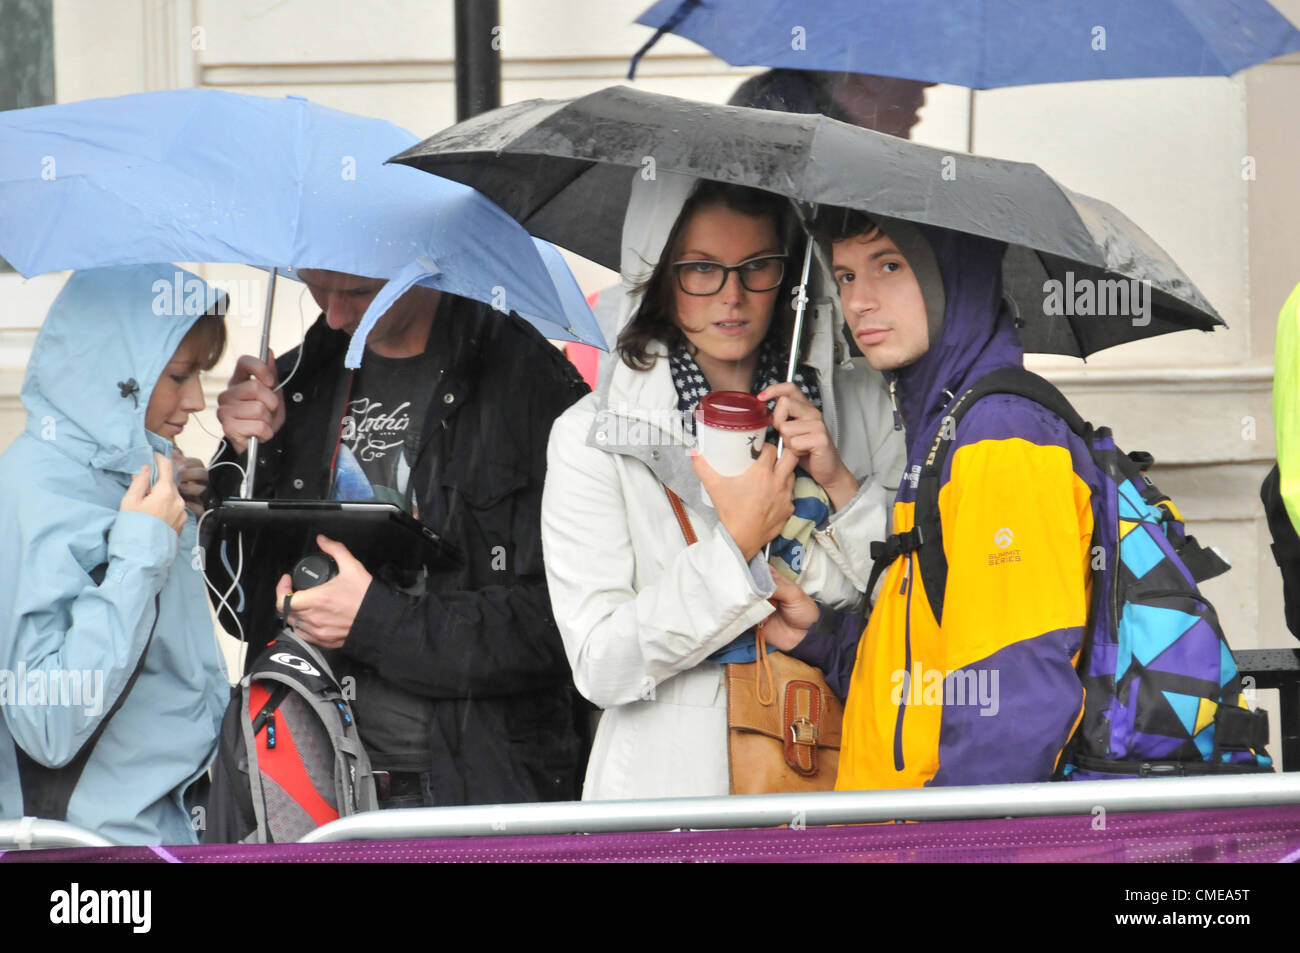 Hyde Park Corner, London, UK. 29th July 2012. The crowd try to stay dry as they watch the women's cycling road race at Hyde Park Corner as the race approaches the end as the riders and crowd endure heavy rain and a thunderstorm. Stock Photo